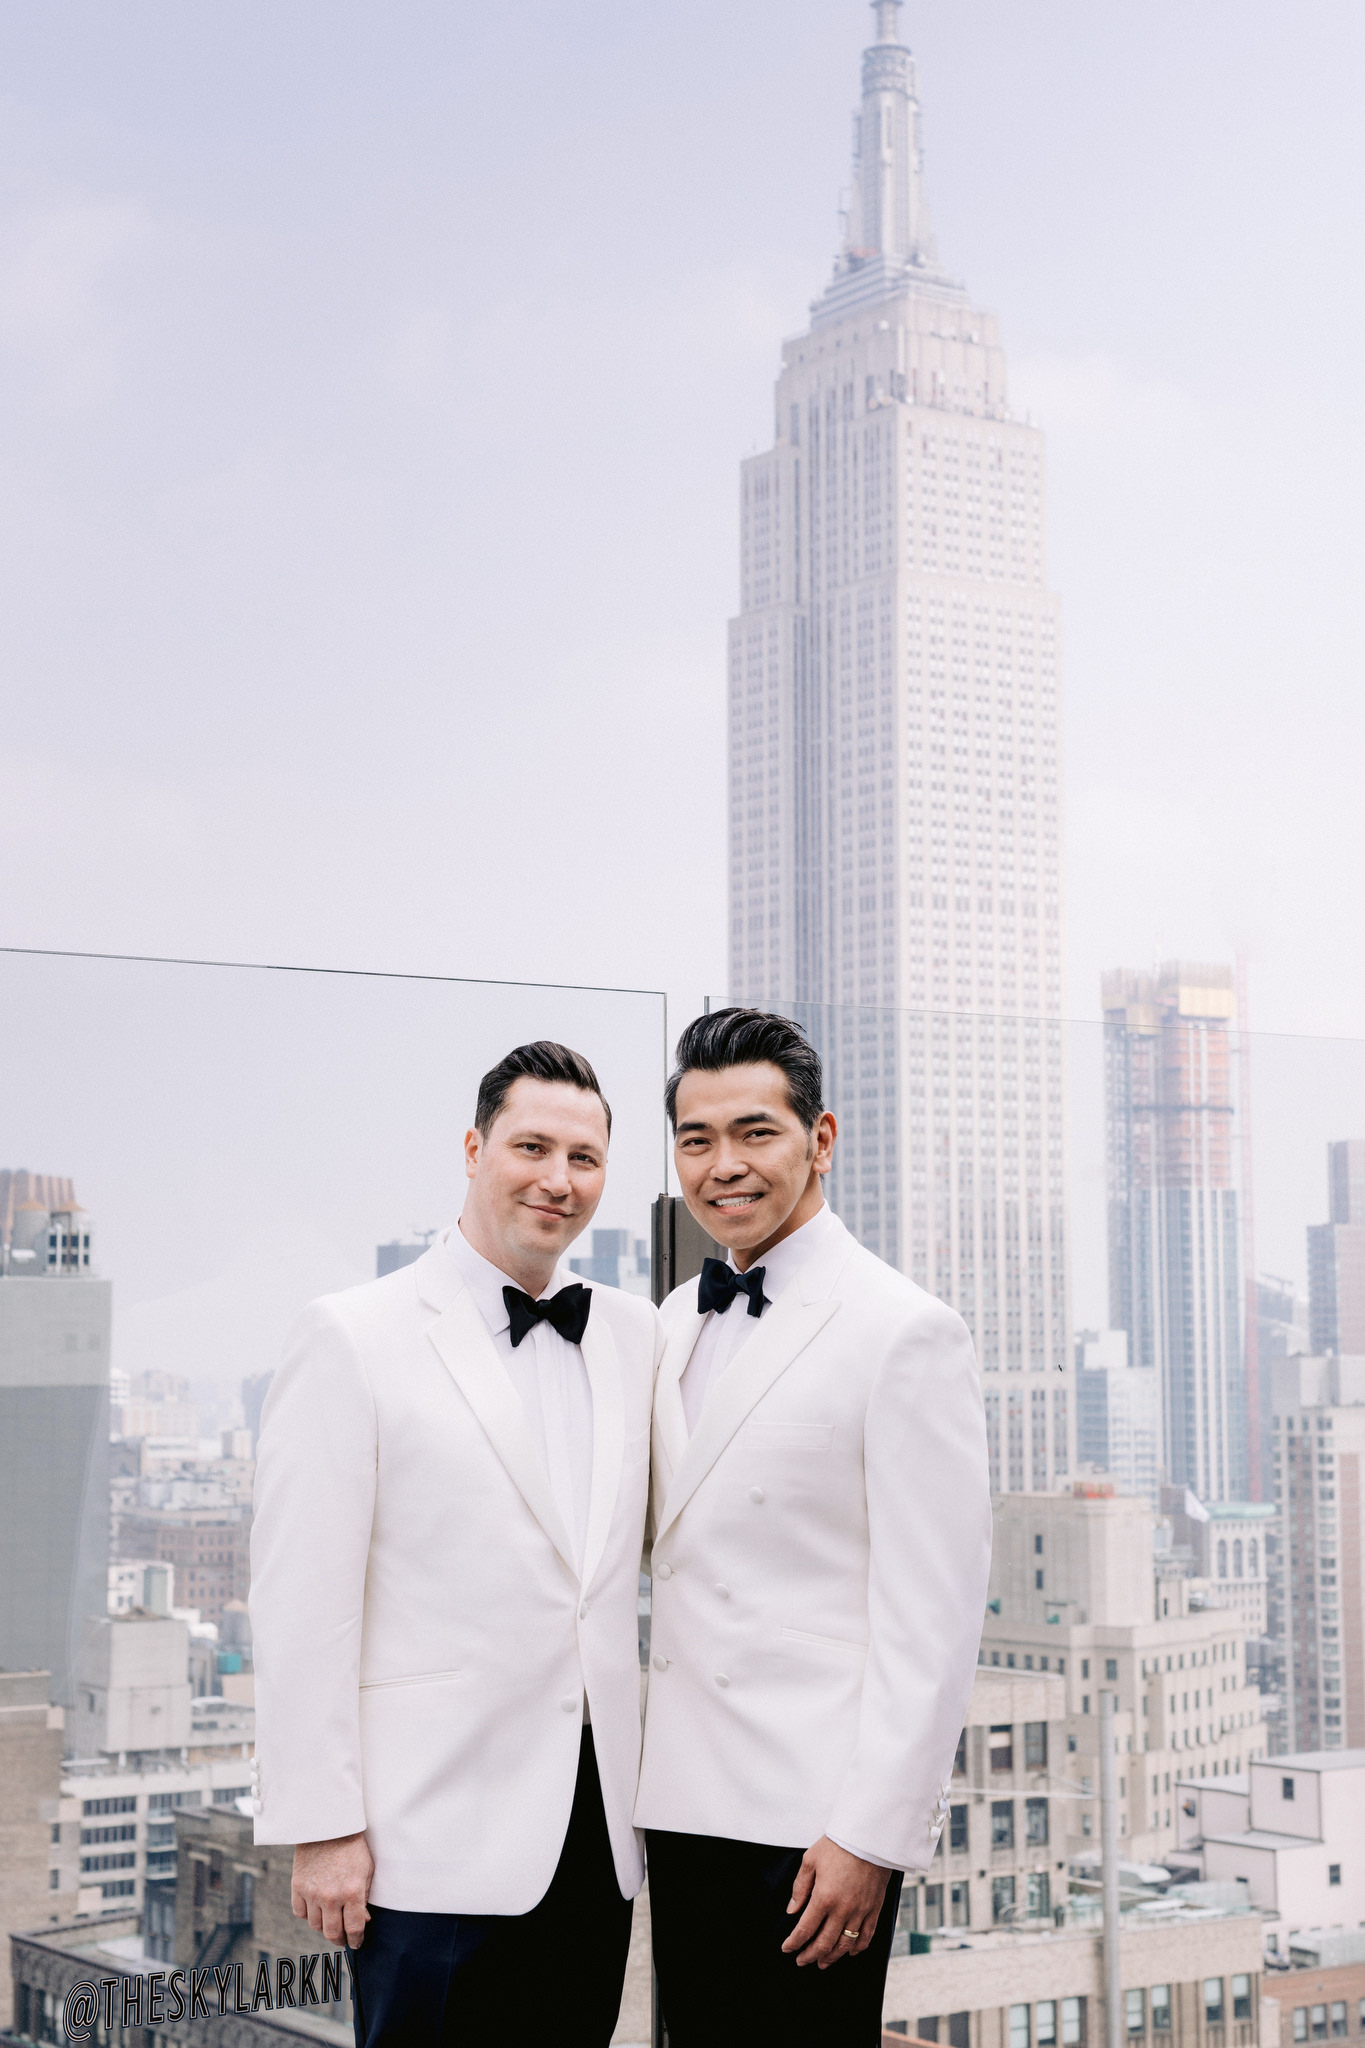 Same sex male couple in white suits on wedding day with Empire State Building in background